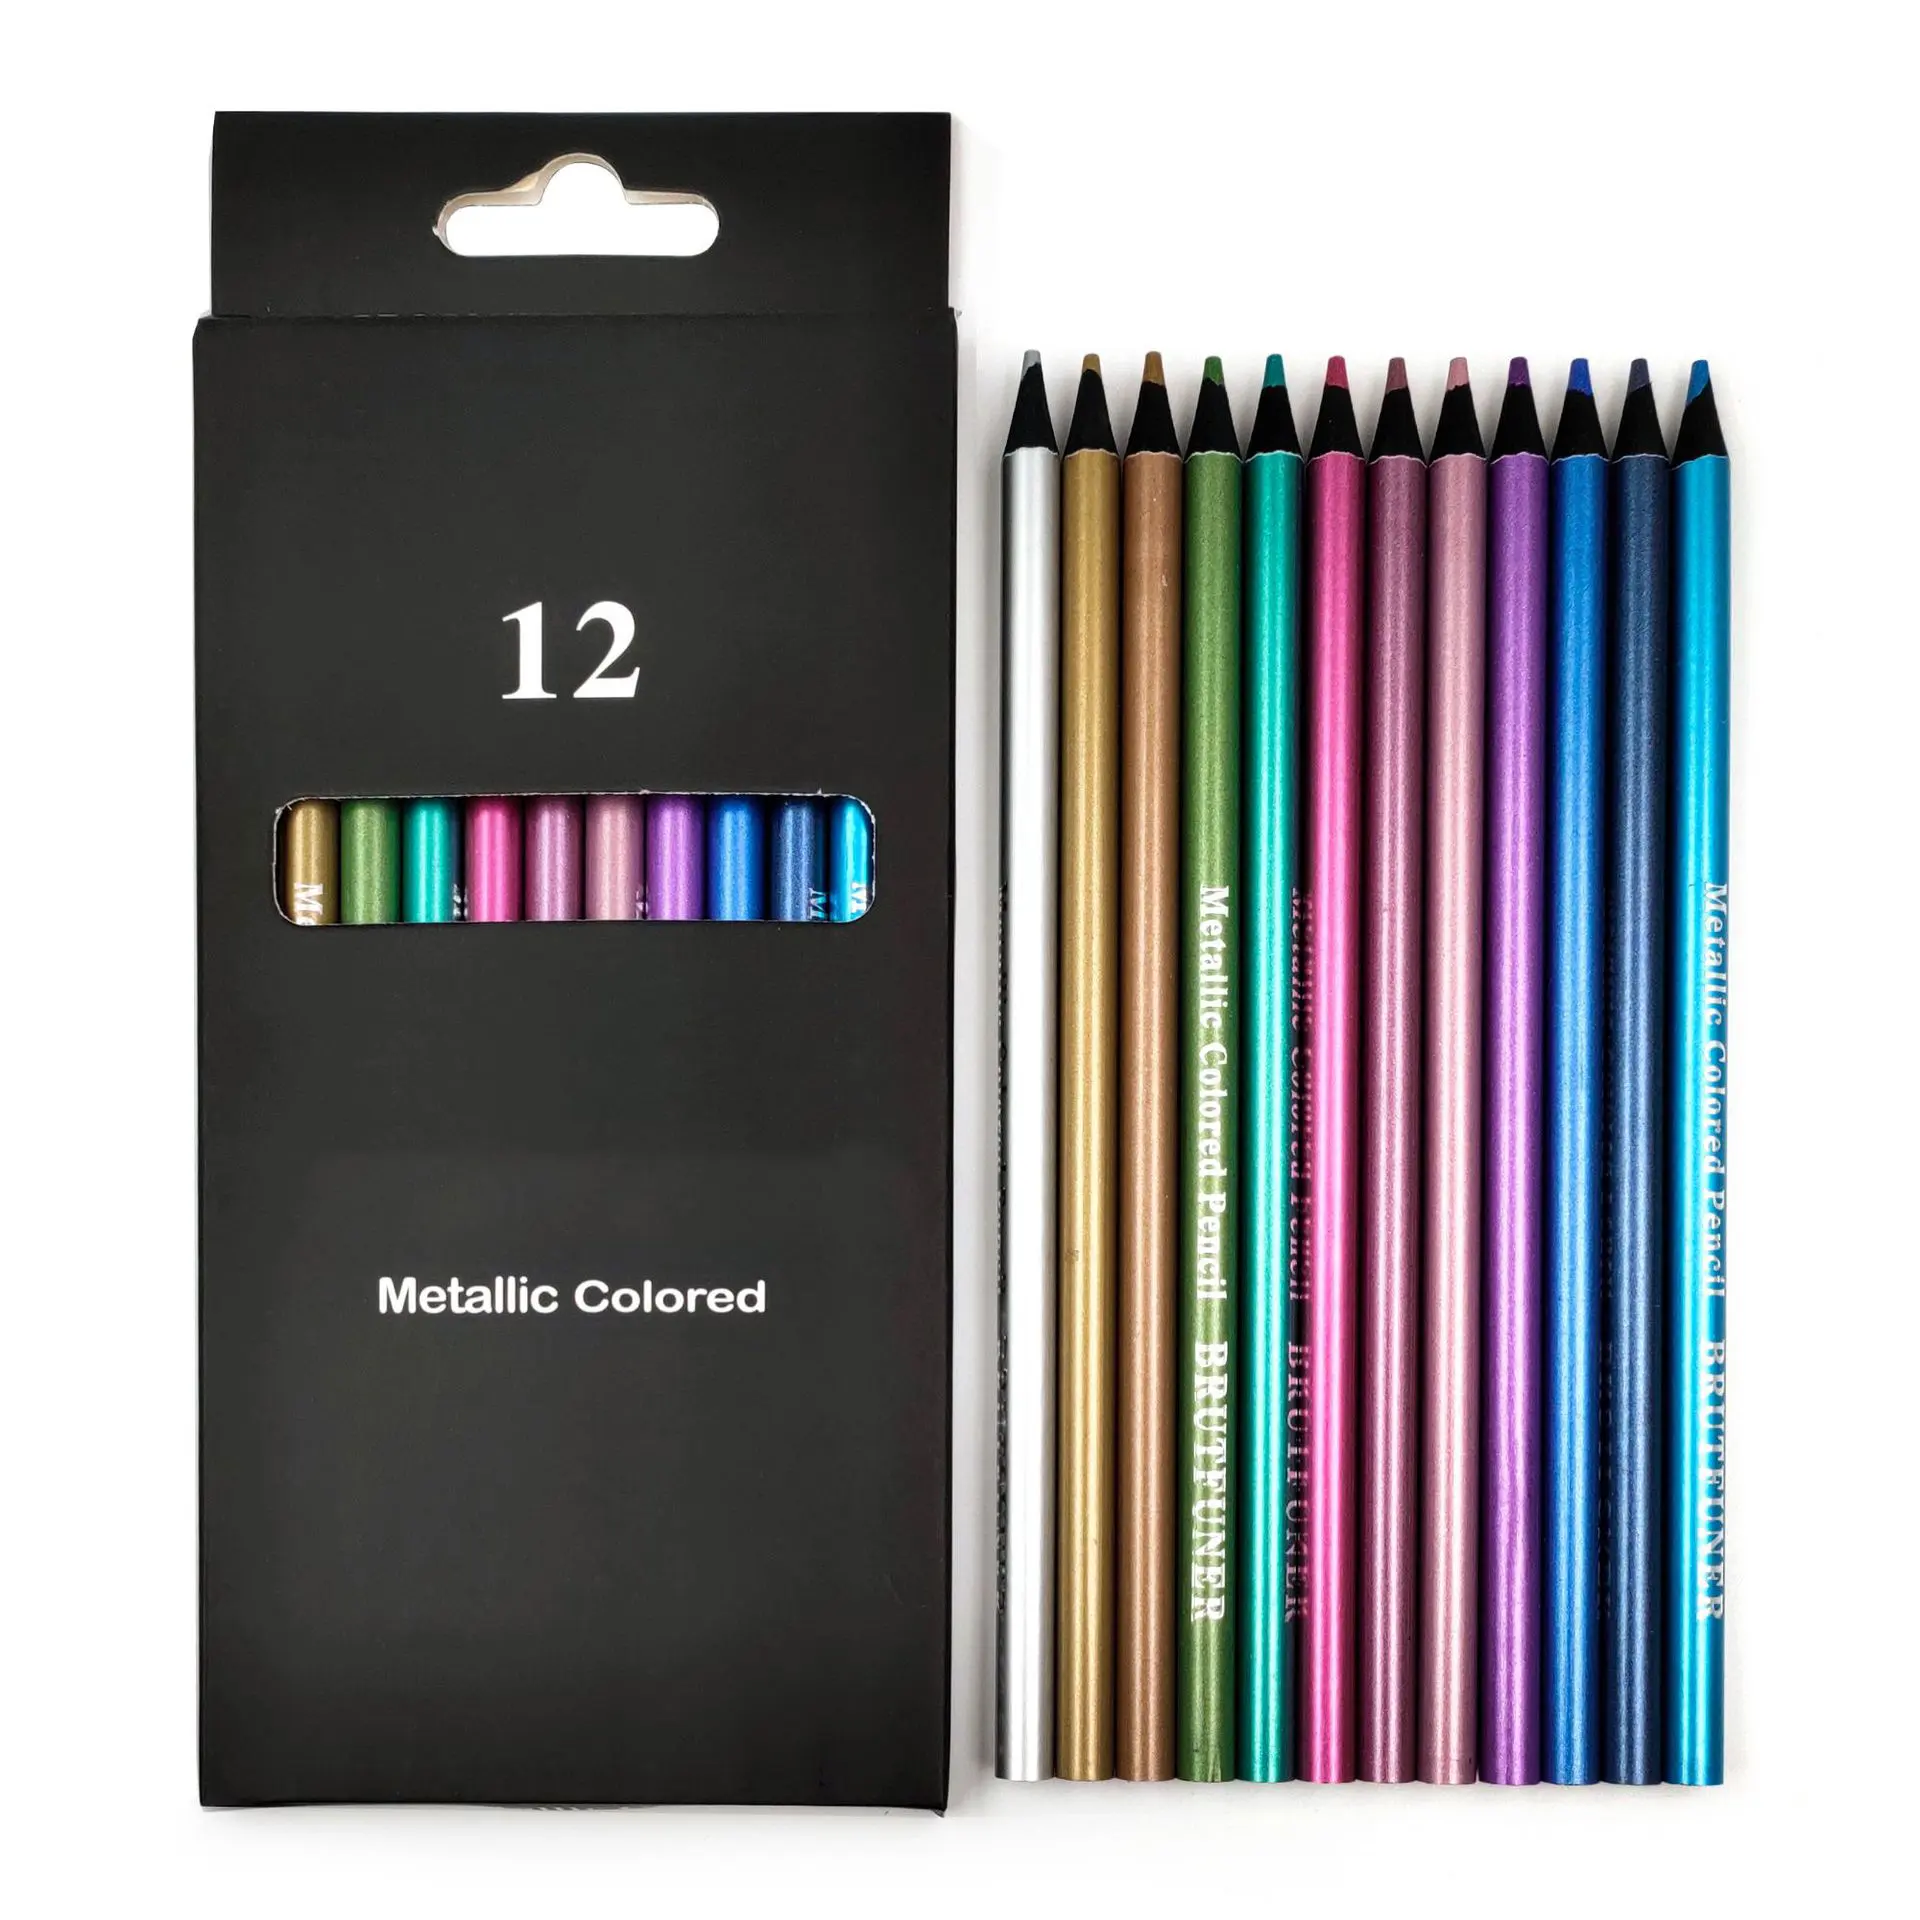 Custom 7 inch 12 color quality pencils metallic lead sketch drawing pencil set with box for school and office